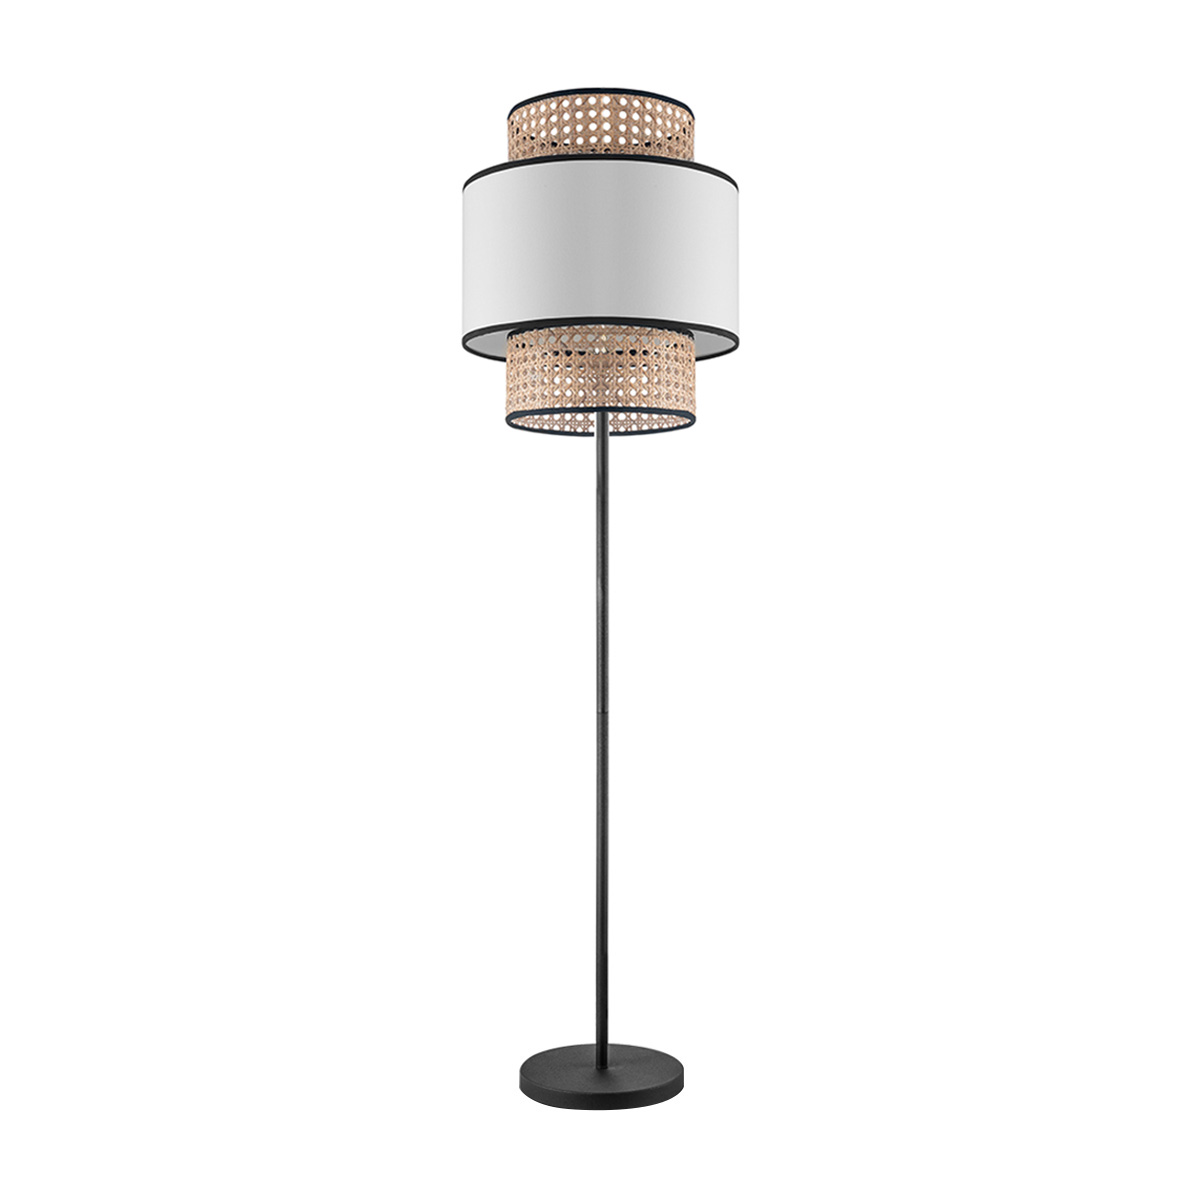 Tangla lighting - TLF7013-30WT - LED floor lamp 1 Light - metal and natural rattan and TC fabric in natural and white - bright - E27